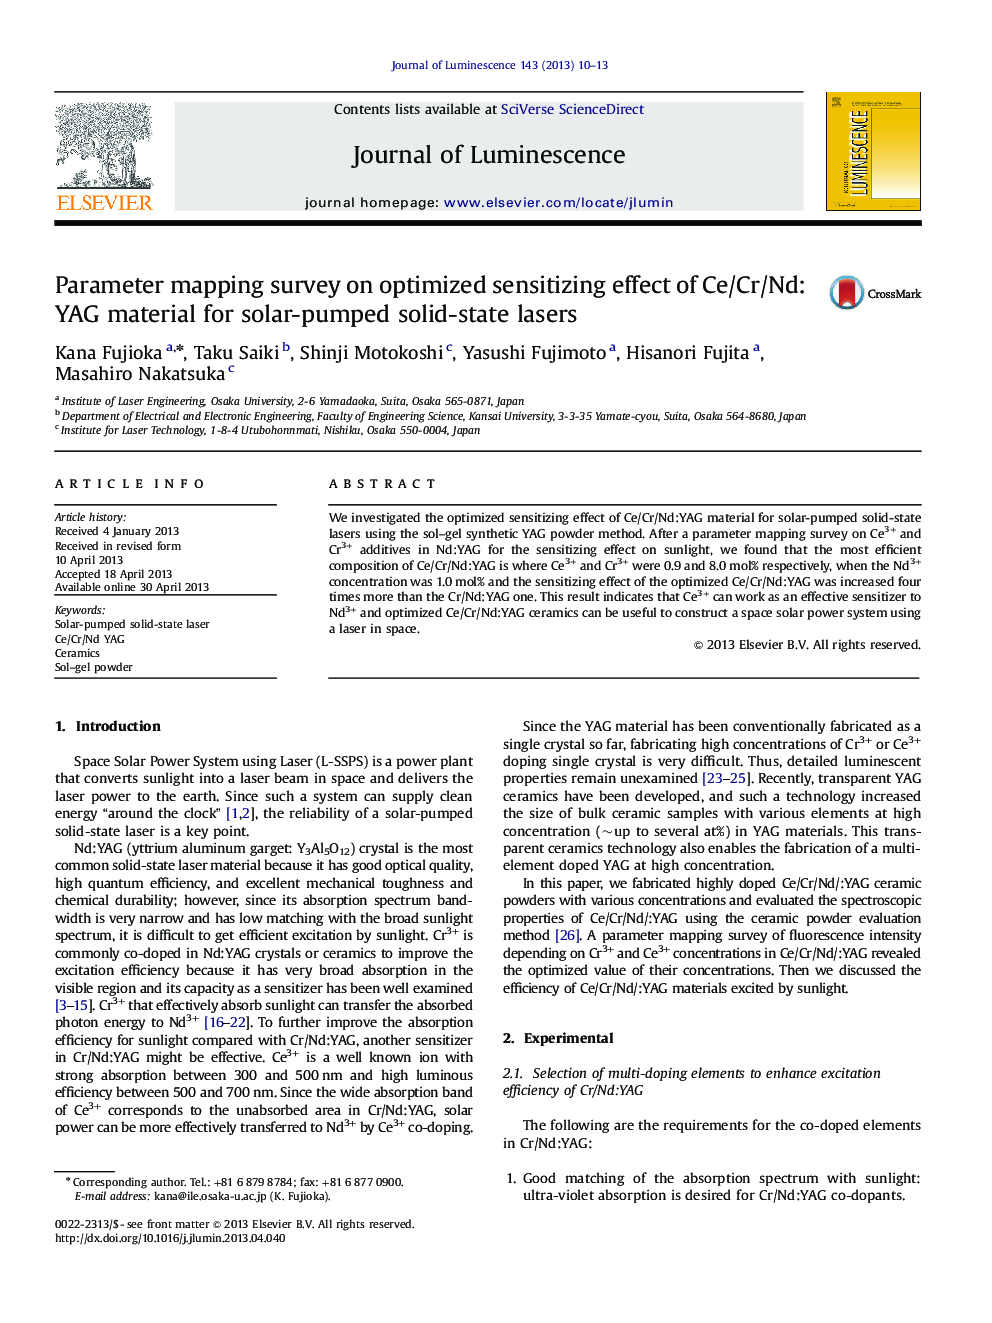 Parameter mapping survey on optimized sensitizing effect of Ce/Cr/Nd:YAG material for solar-pumped solid-state lasers